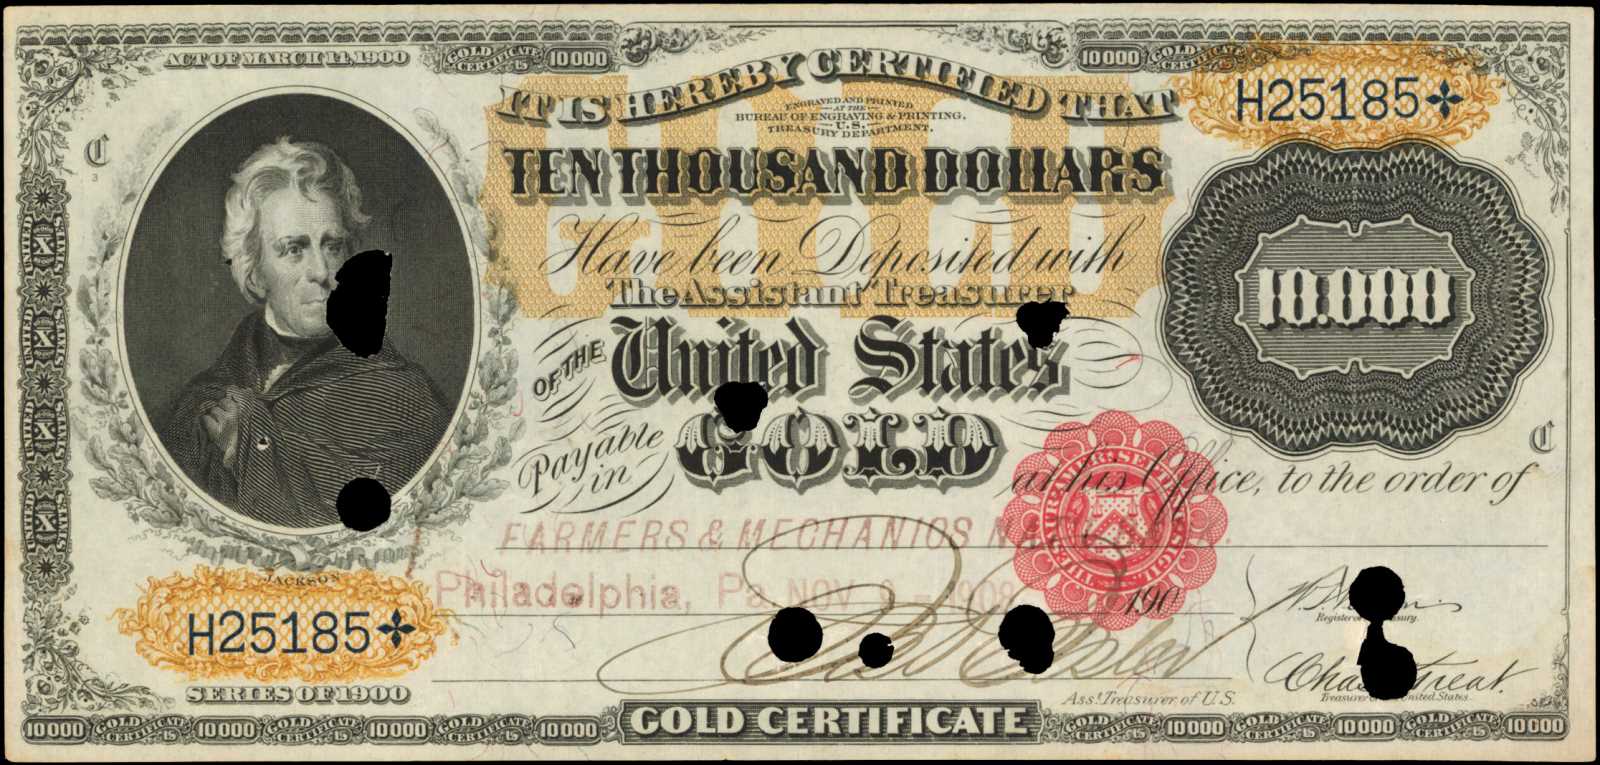 Gold-plated souvenir banknote of 10 dollars in a security file